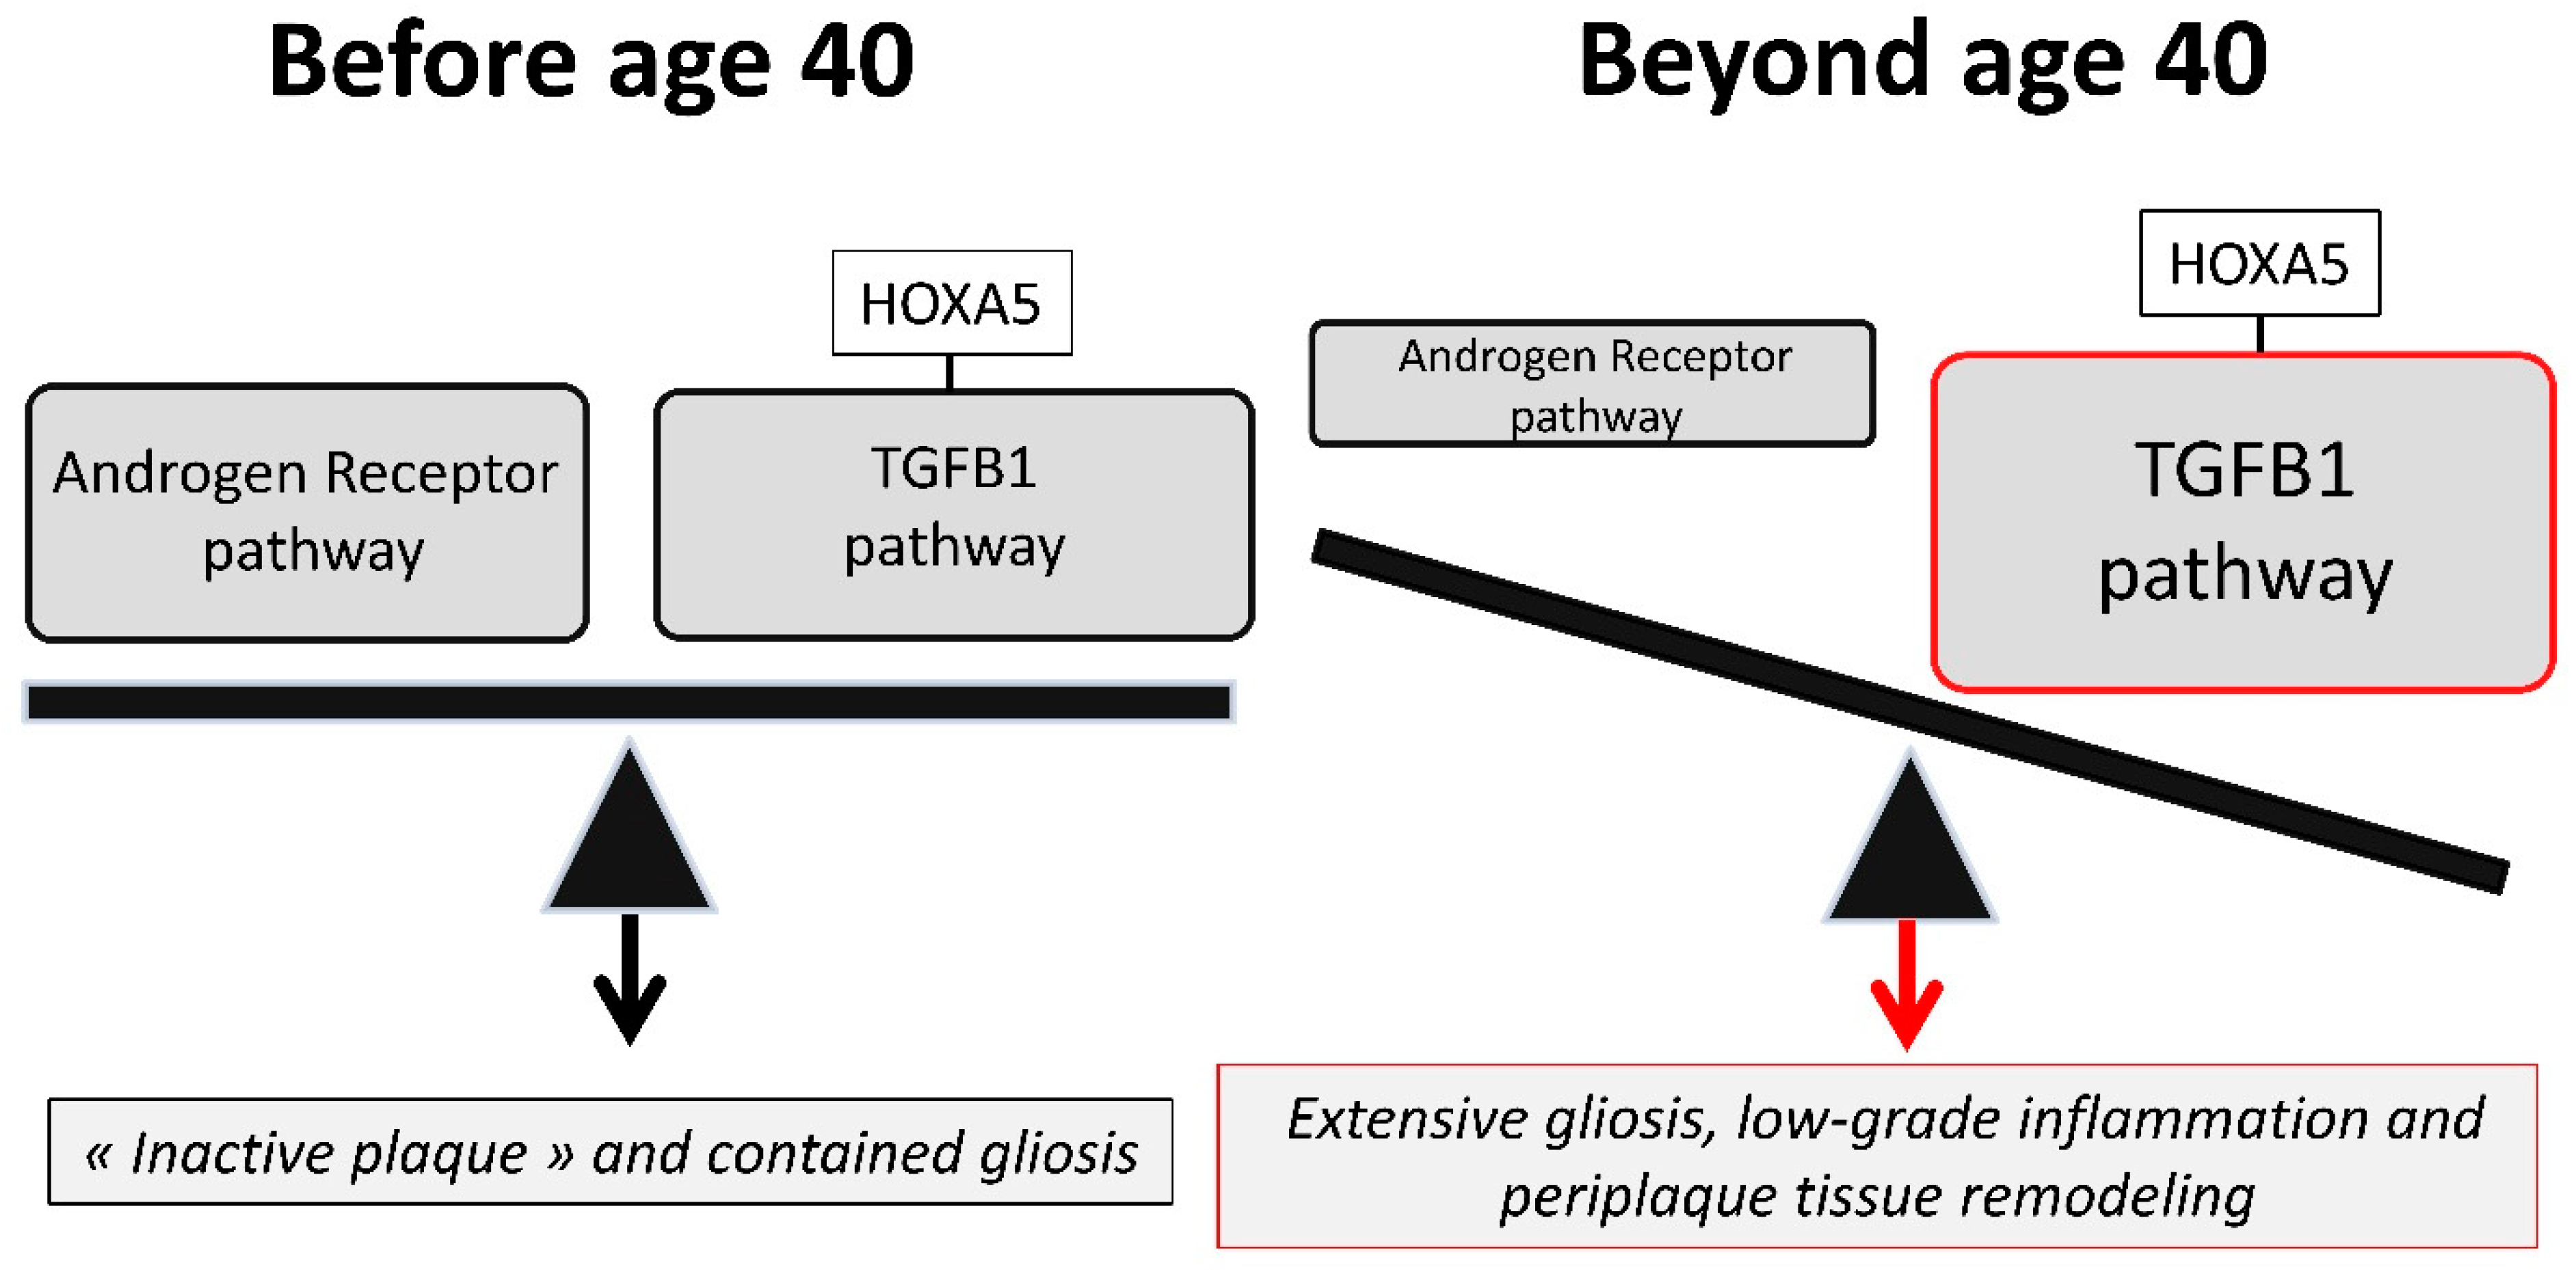 IJMS | Free Full-Text | TGFB1-Mediated Gliosis in Multiple Sclerosis Spinal  Cords Is Favored by the Regionalized Expression of HOXA5 and the Age-Dependent  Decline in Androgen Receptor Ligands